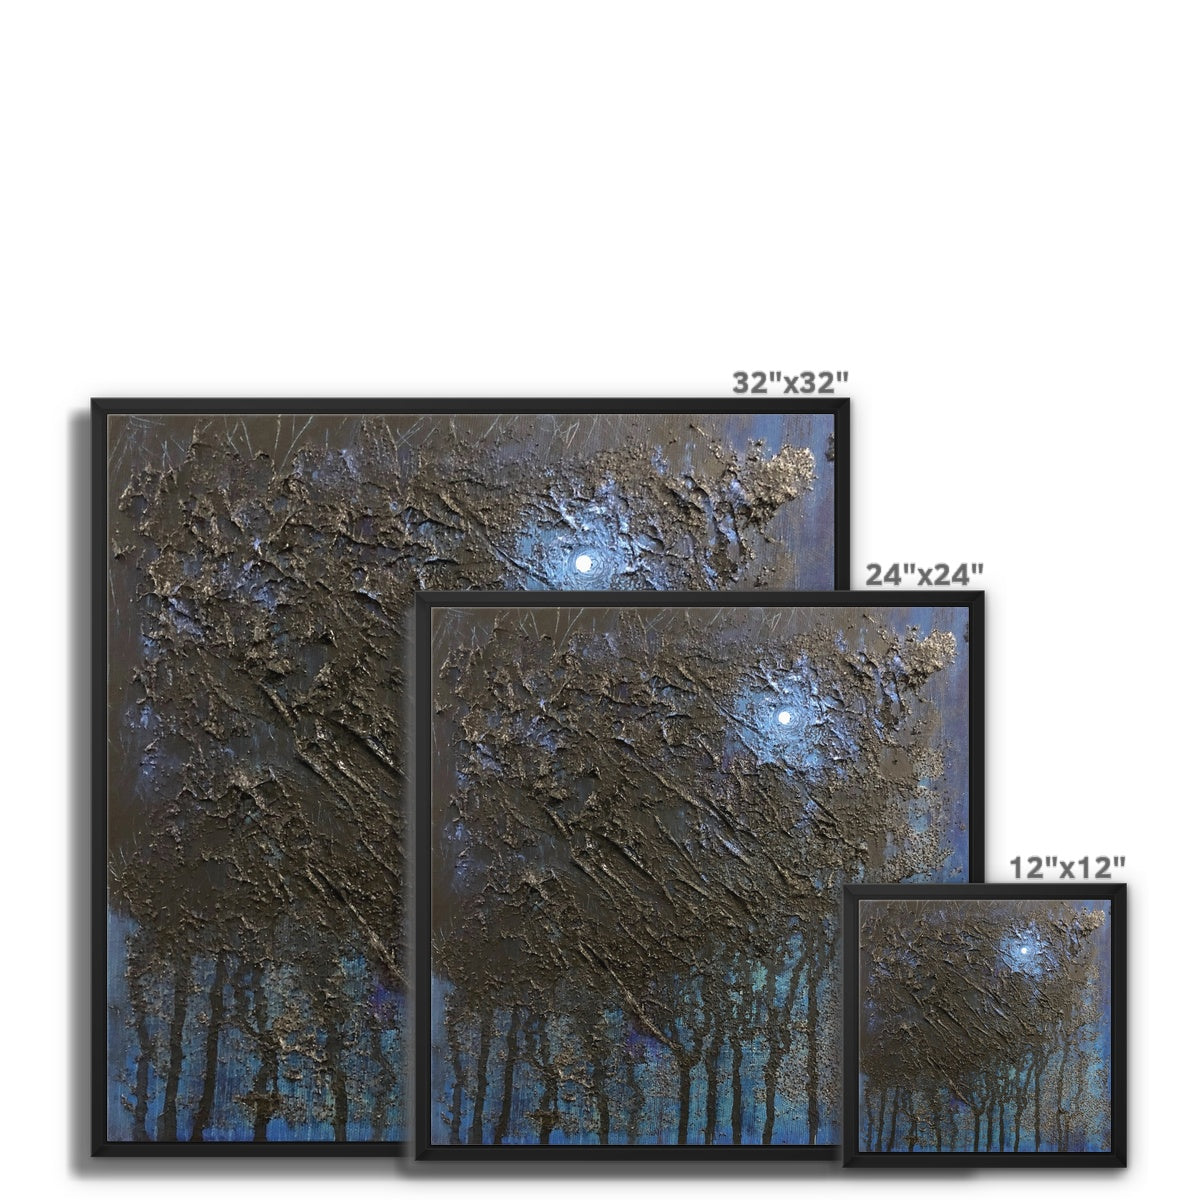 The Blue Moon Wood Abstract Painting | Framed Canvas From Scotland-Floating Framed Canvas Prints-Abstract & Impressionistic Art Gallery-Paintings, Prints, Homeware, Art Gifts From Scotland By Scottish Artist Kevin Hunter